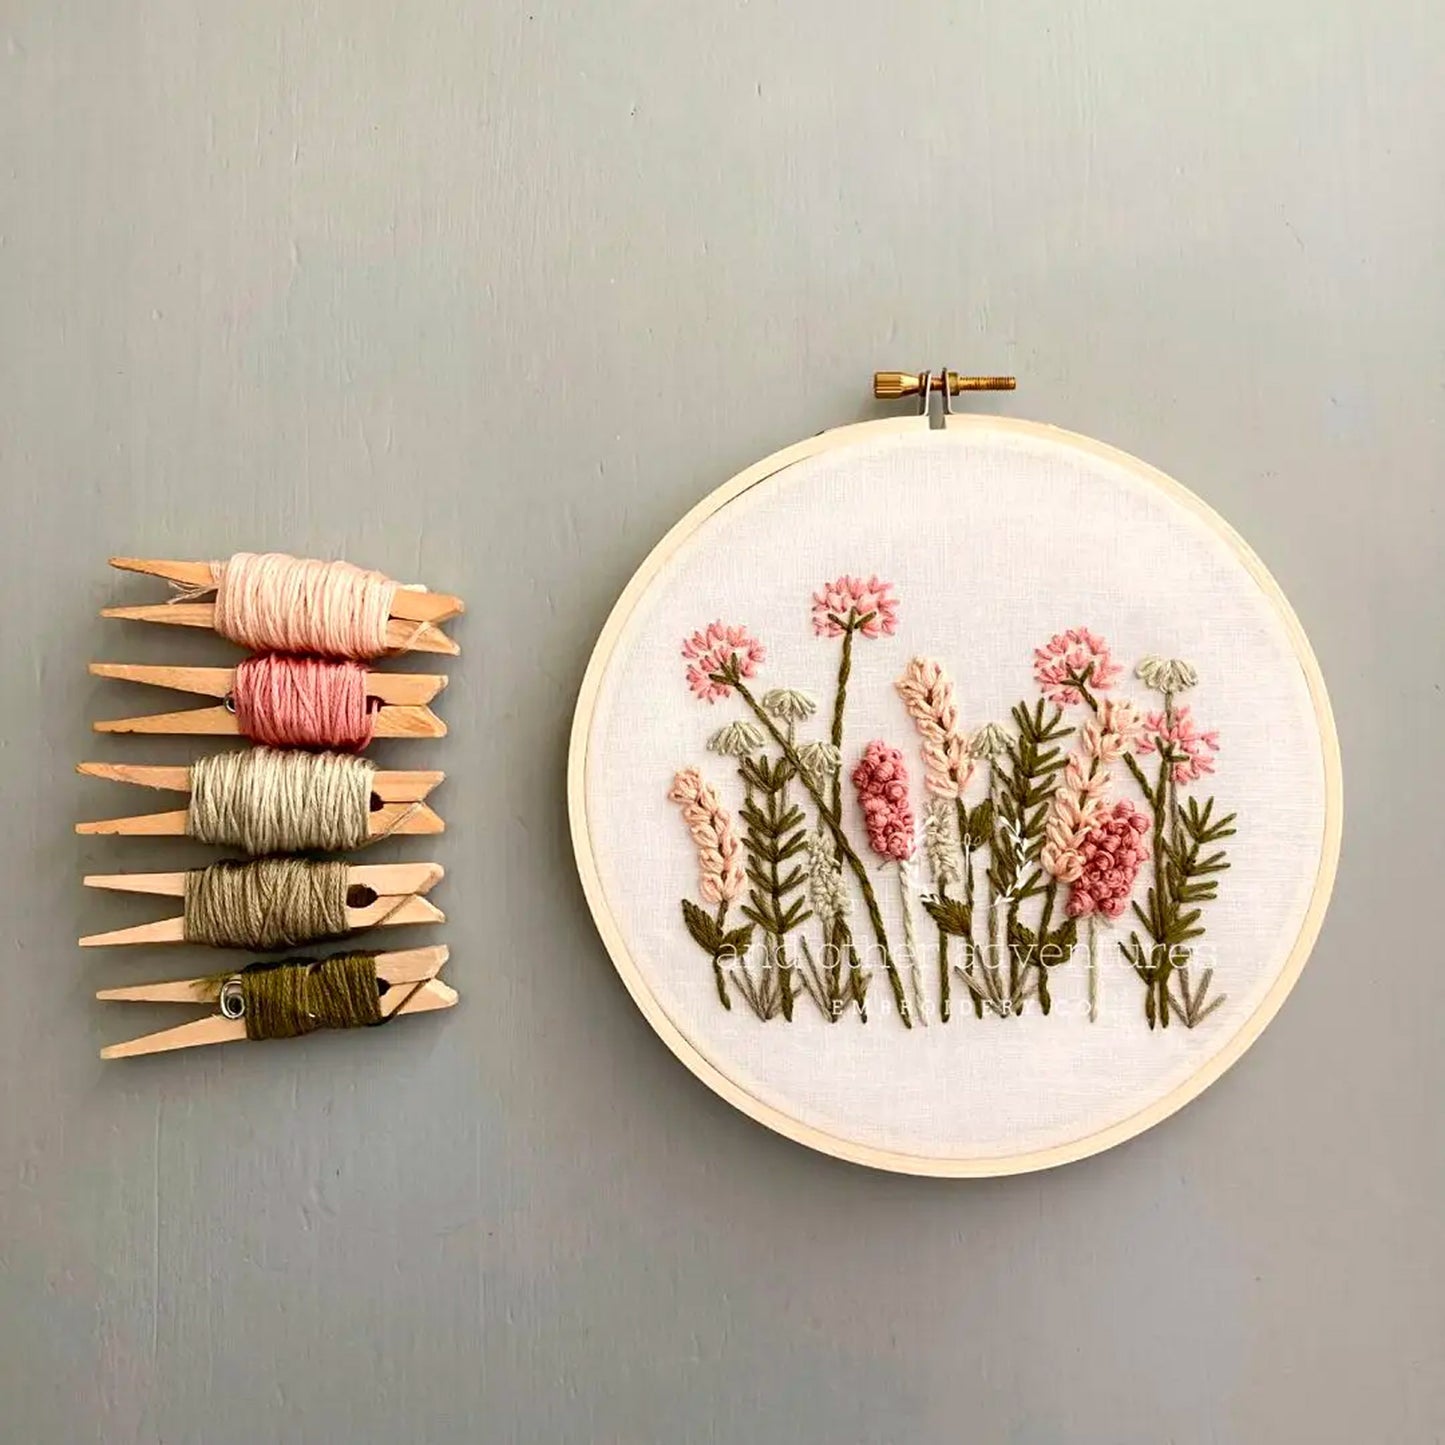 Meadow Embroidery Kit